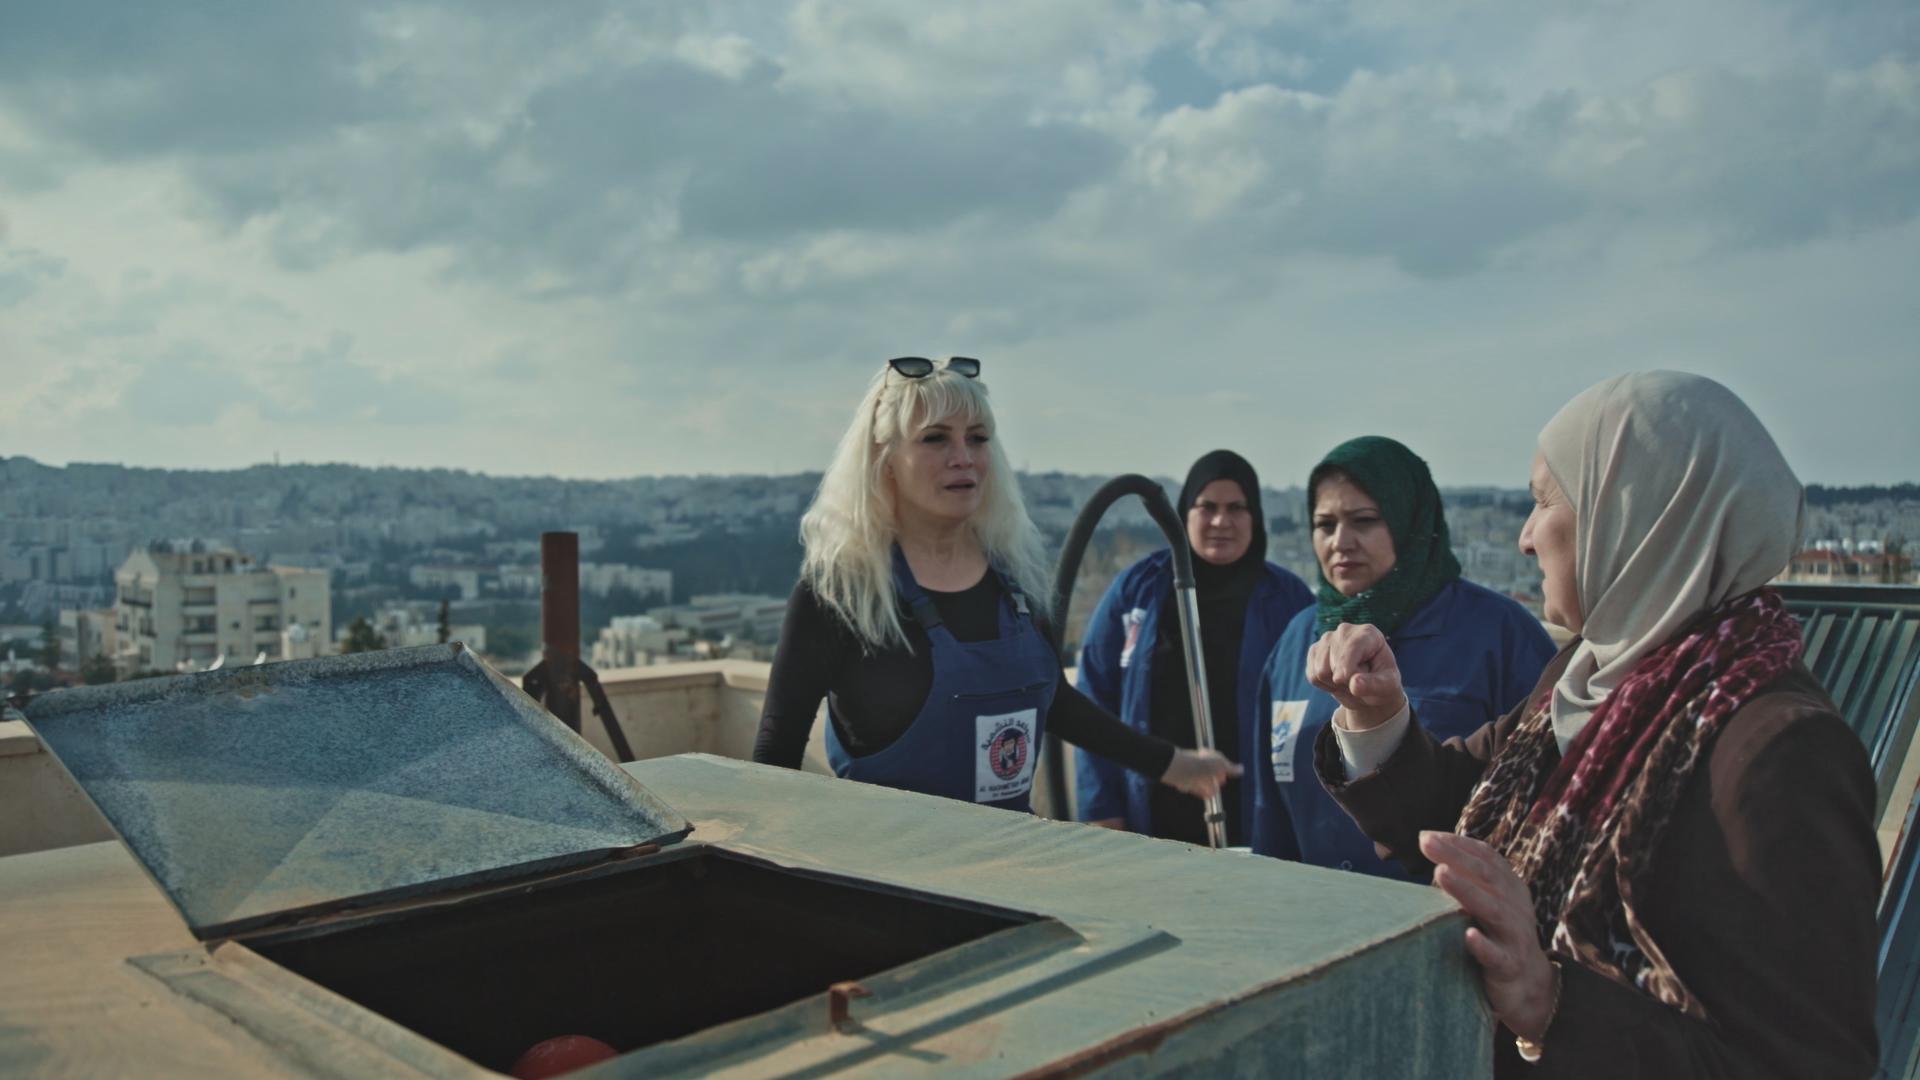 Khawla Al Sheikh, left, leads the way in this scene from ‘Waterproof’. The documentary, shot in Amman, follows the fortunes of Al Sheikh and fellow members of her NGO for female plumbers